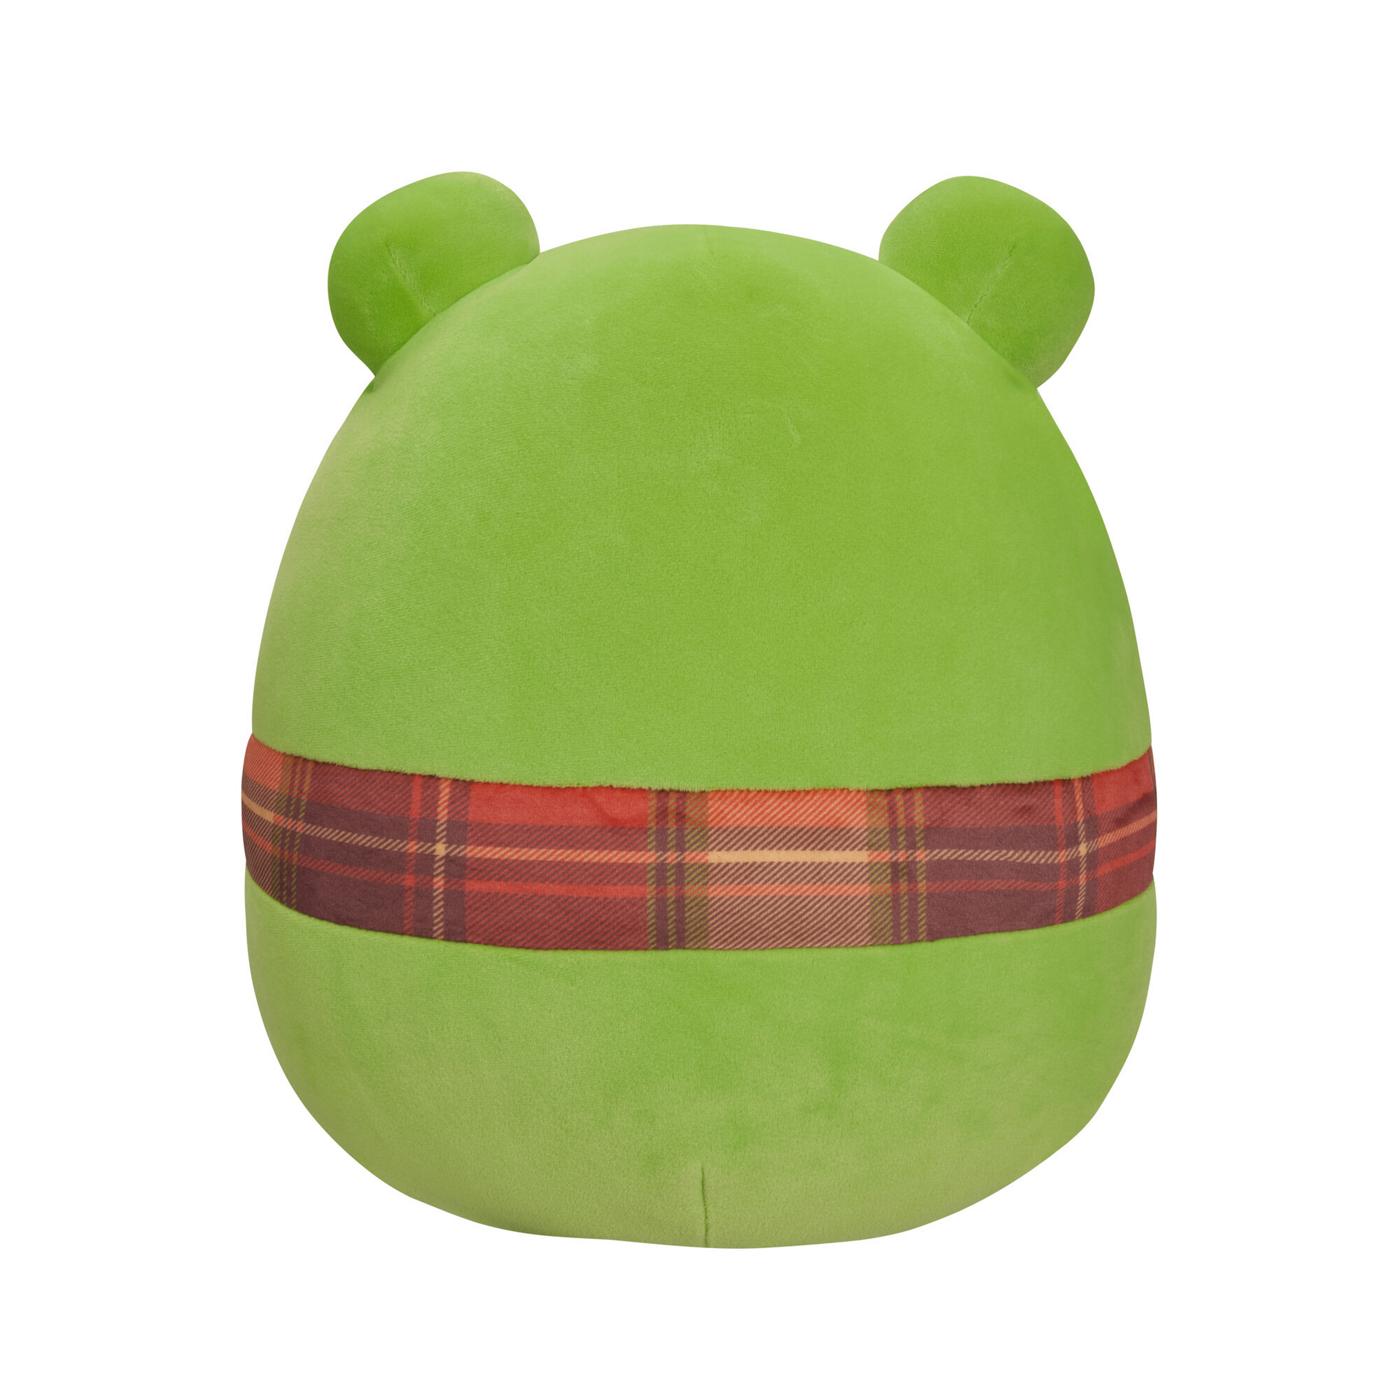 Squishmallows Frog Plush with Scarf - Green - Shop Plush Toys at H-E-B